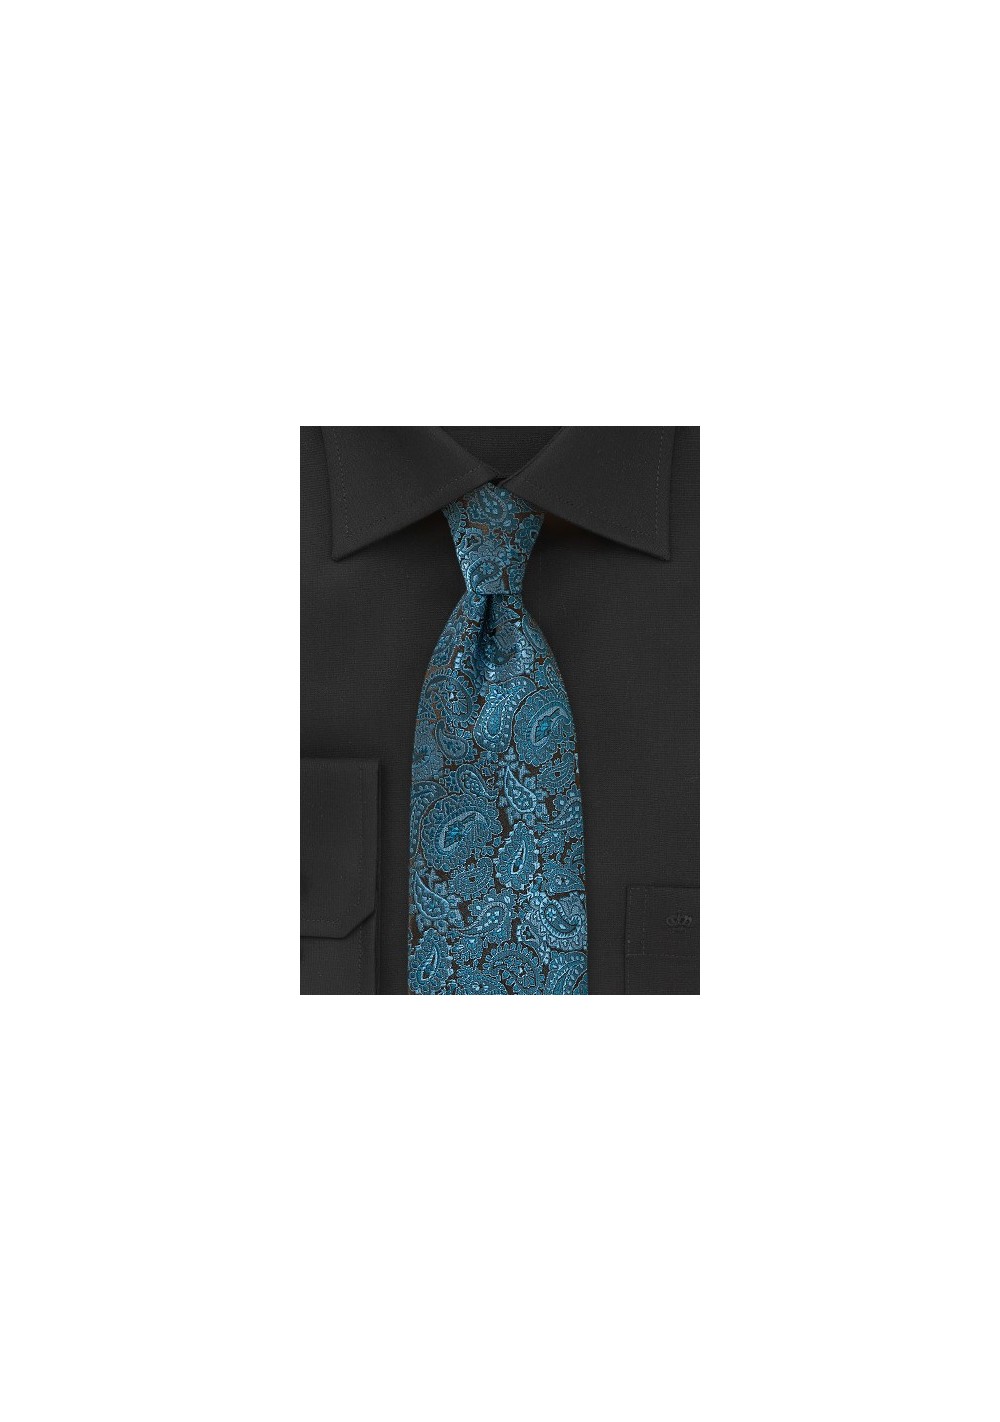 Luxe Paisley Silk Tie in Teal and Black